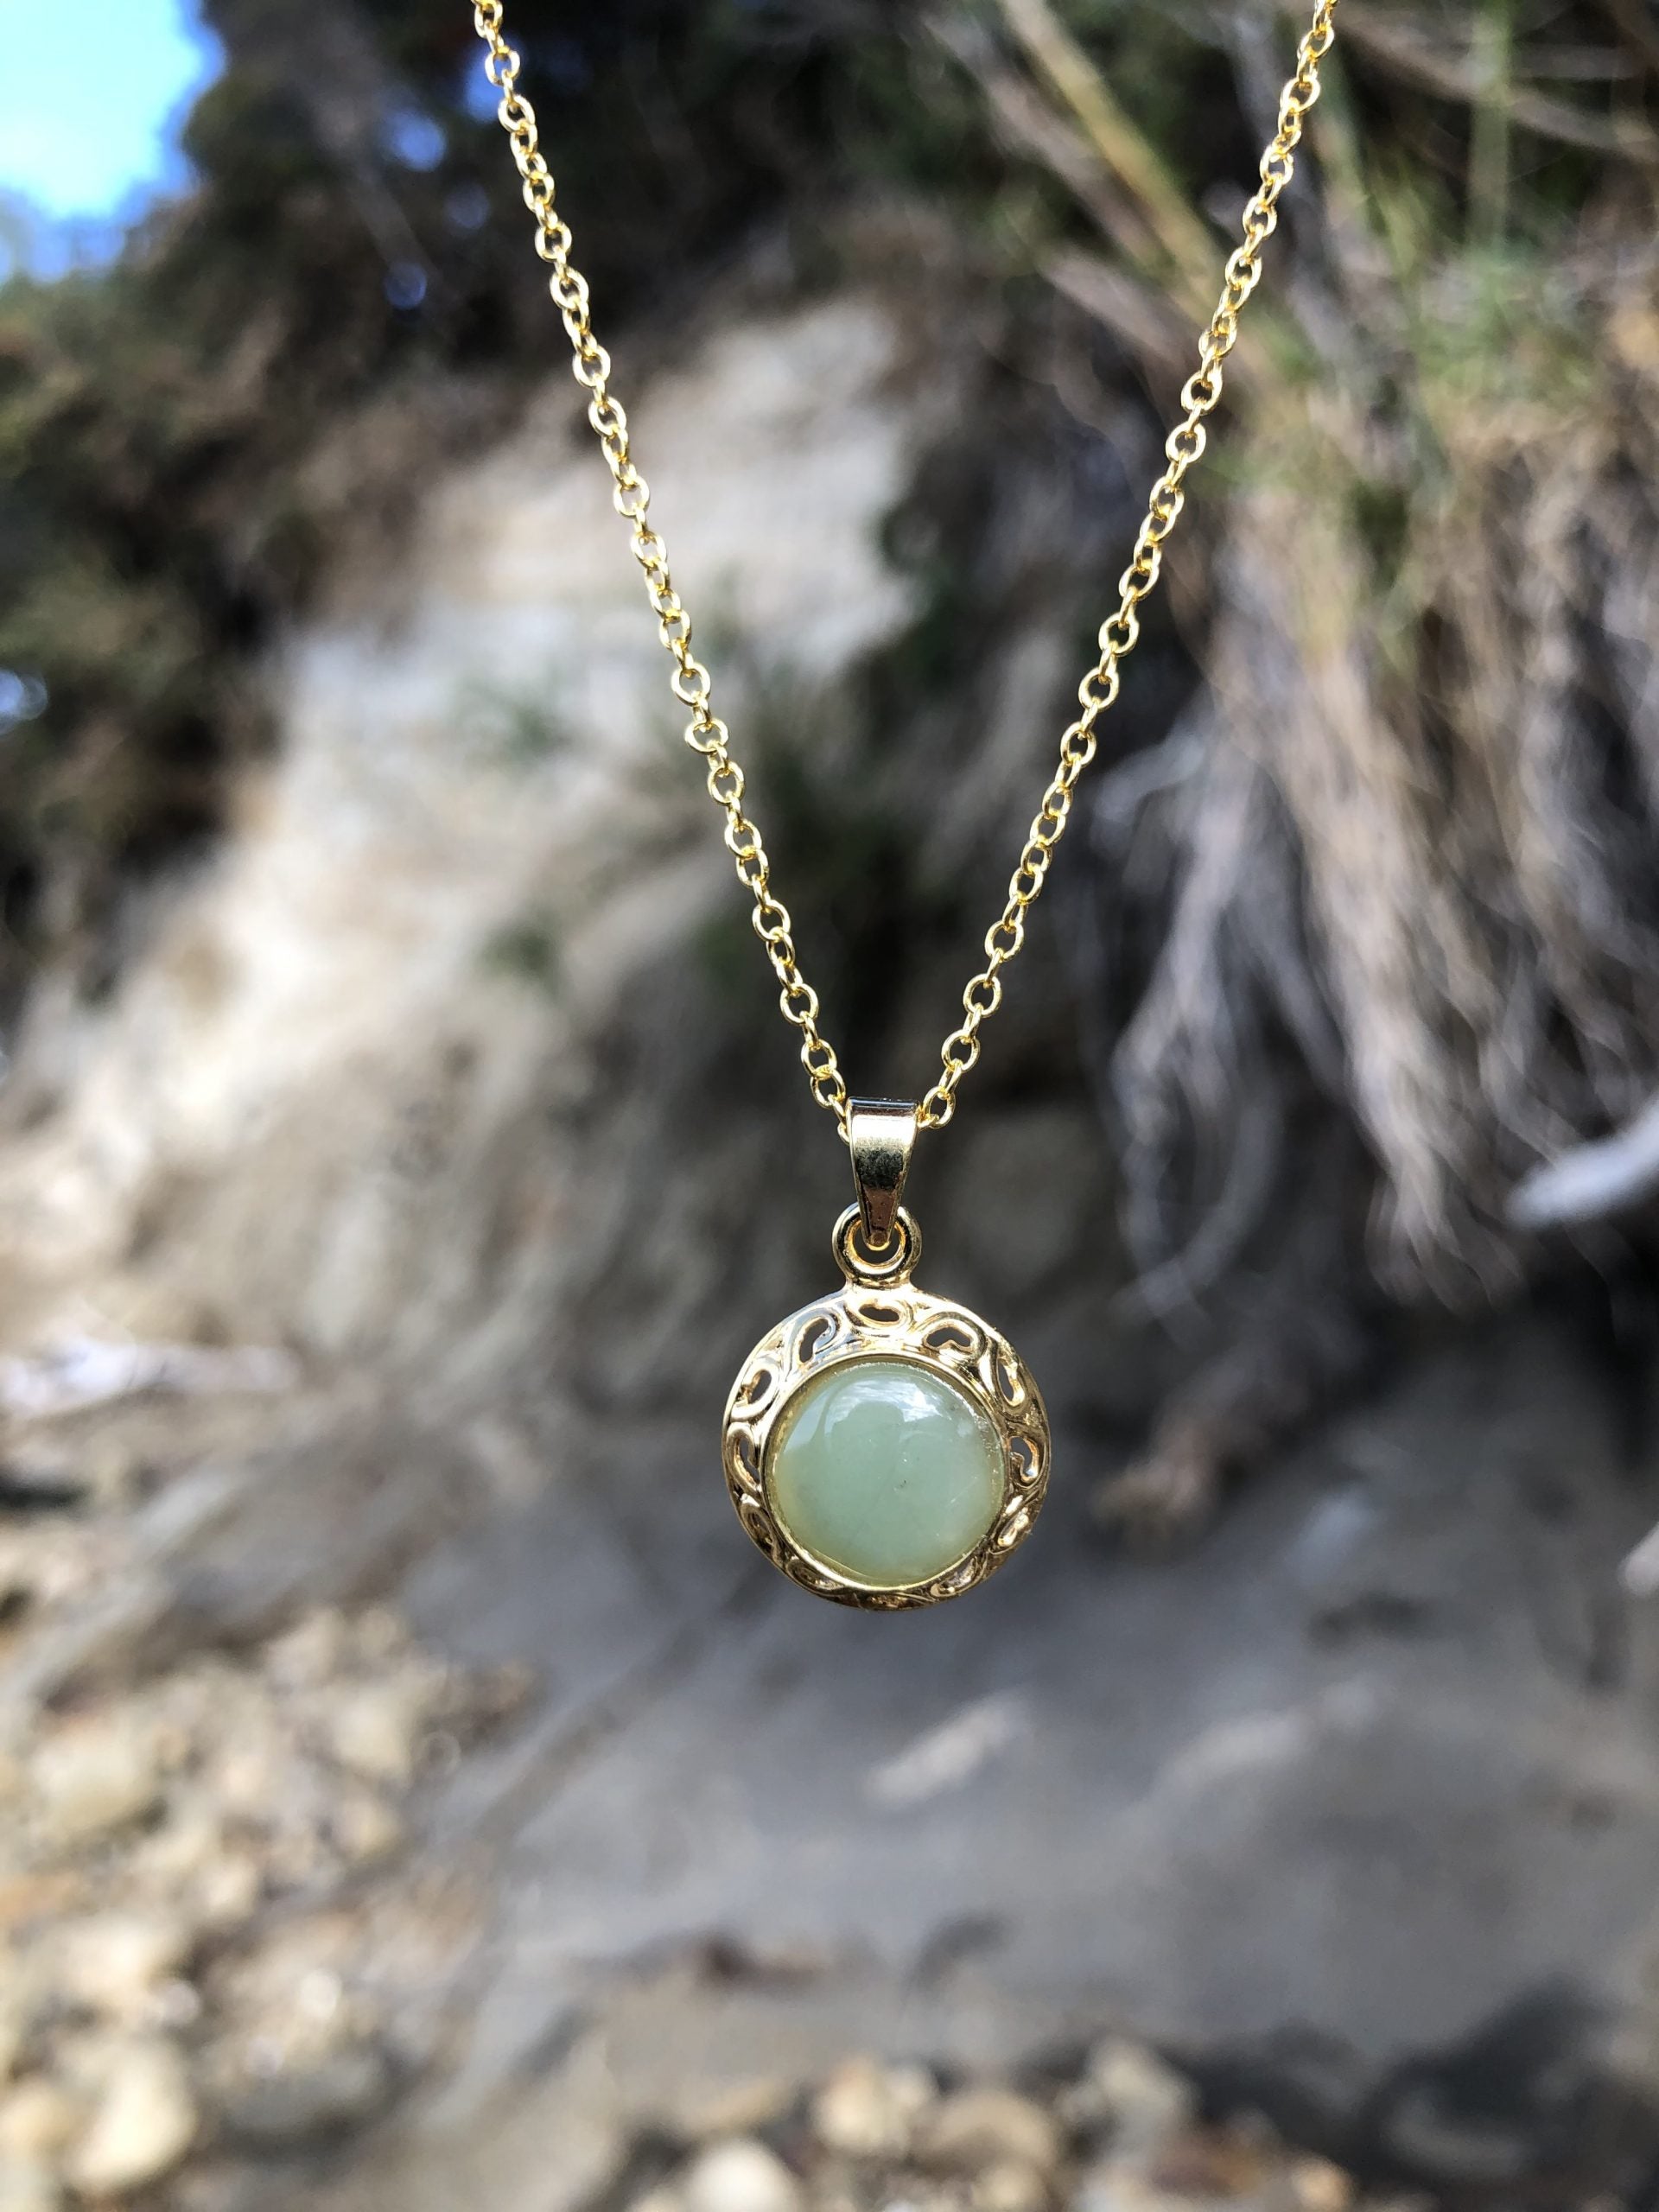 Necklace with natural green aventurine, hand polished to a 10mm round cabochon and set in a gold plated setting with 19 inch chain.